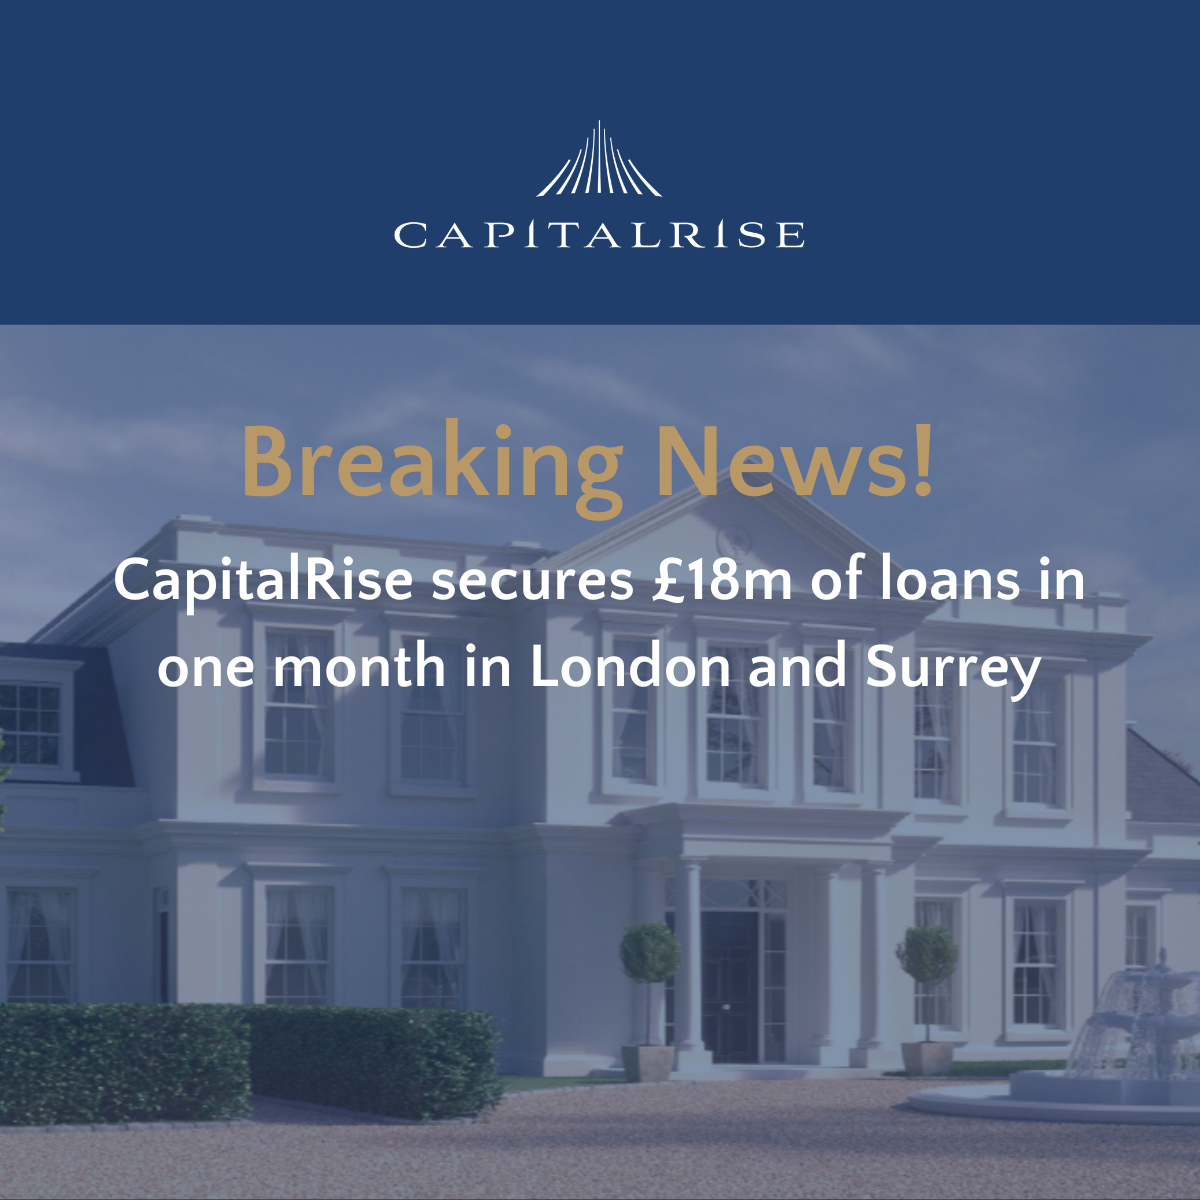 CapitalRise completes £18m of loans across London and Surrey in one month